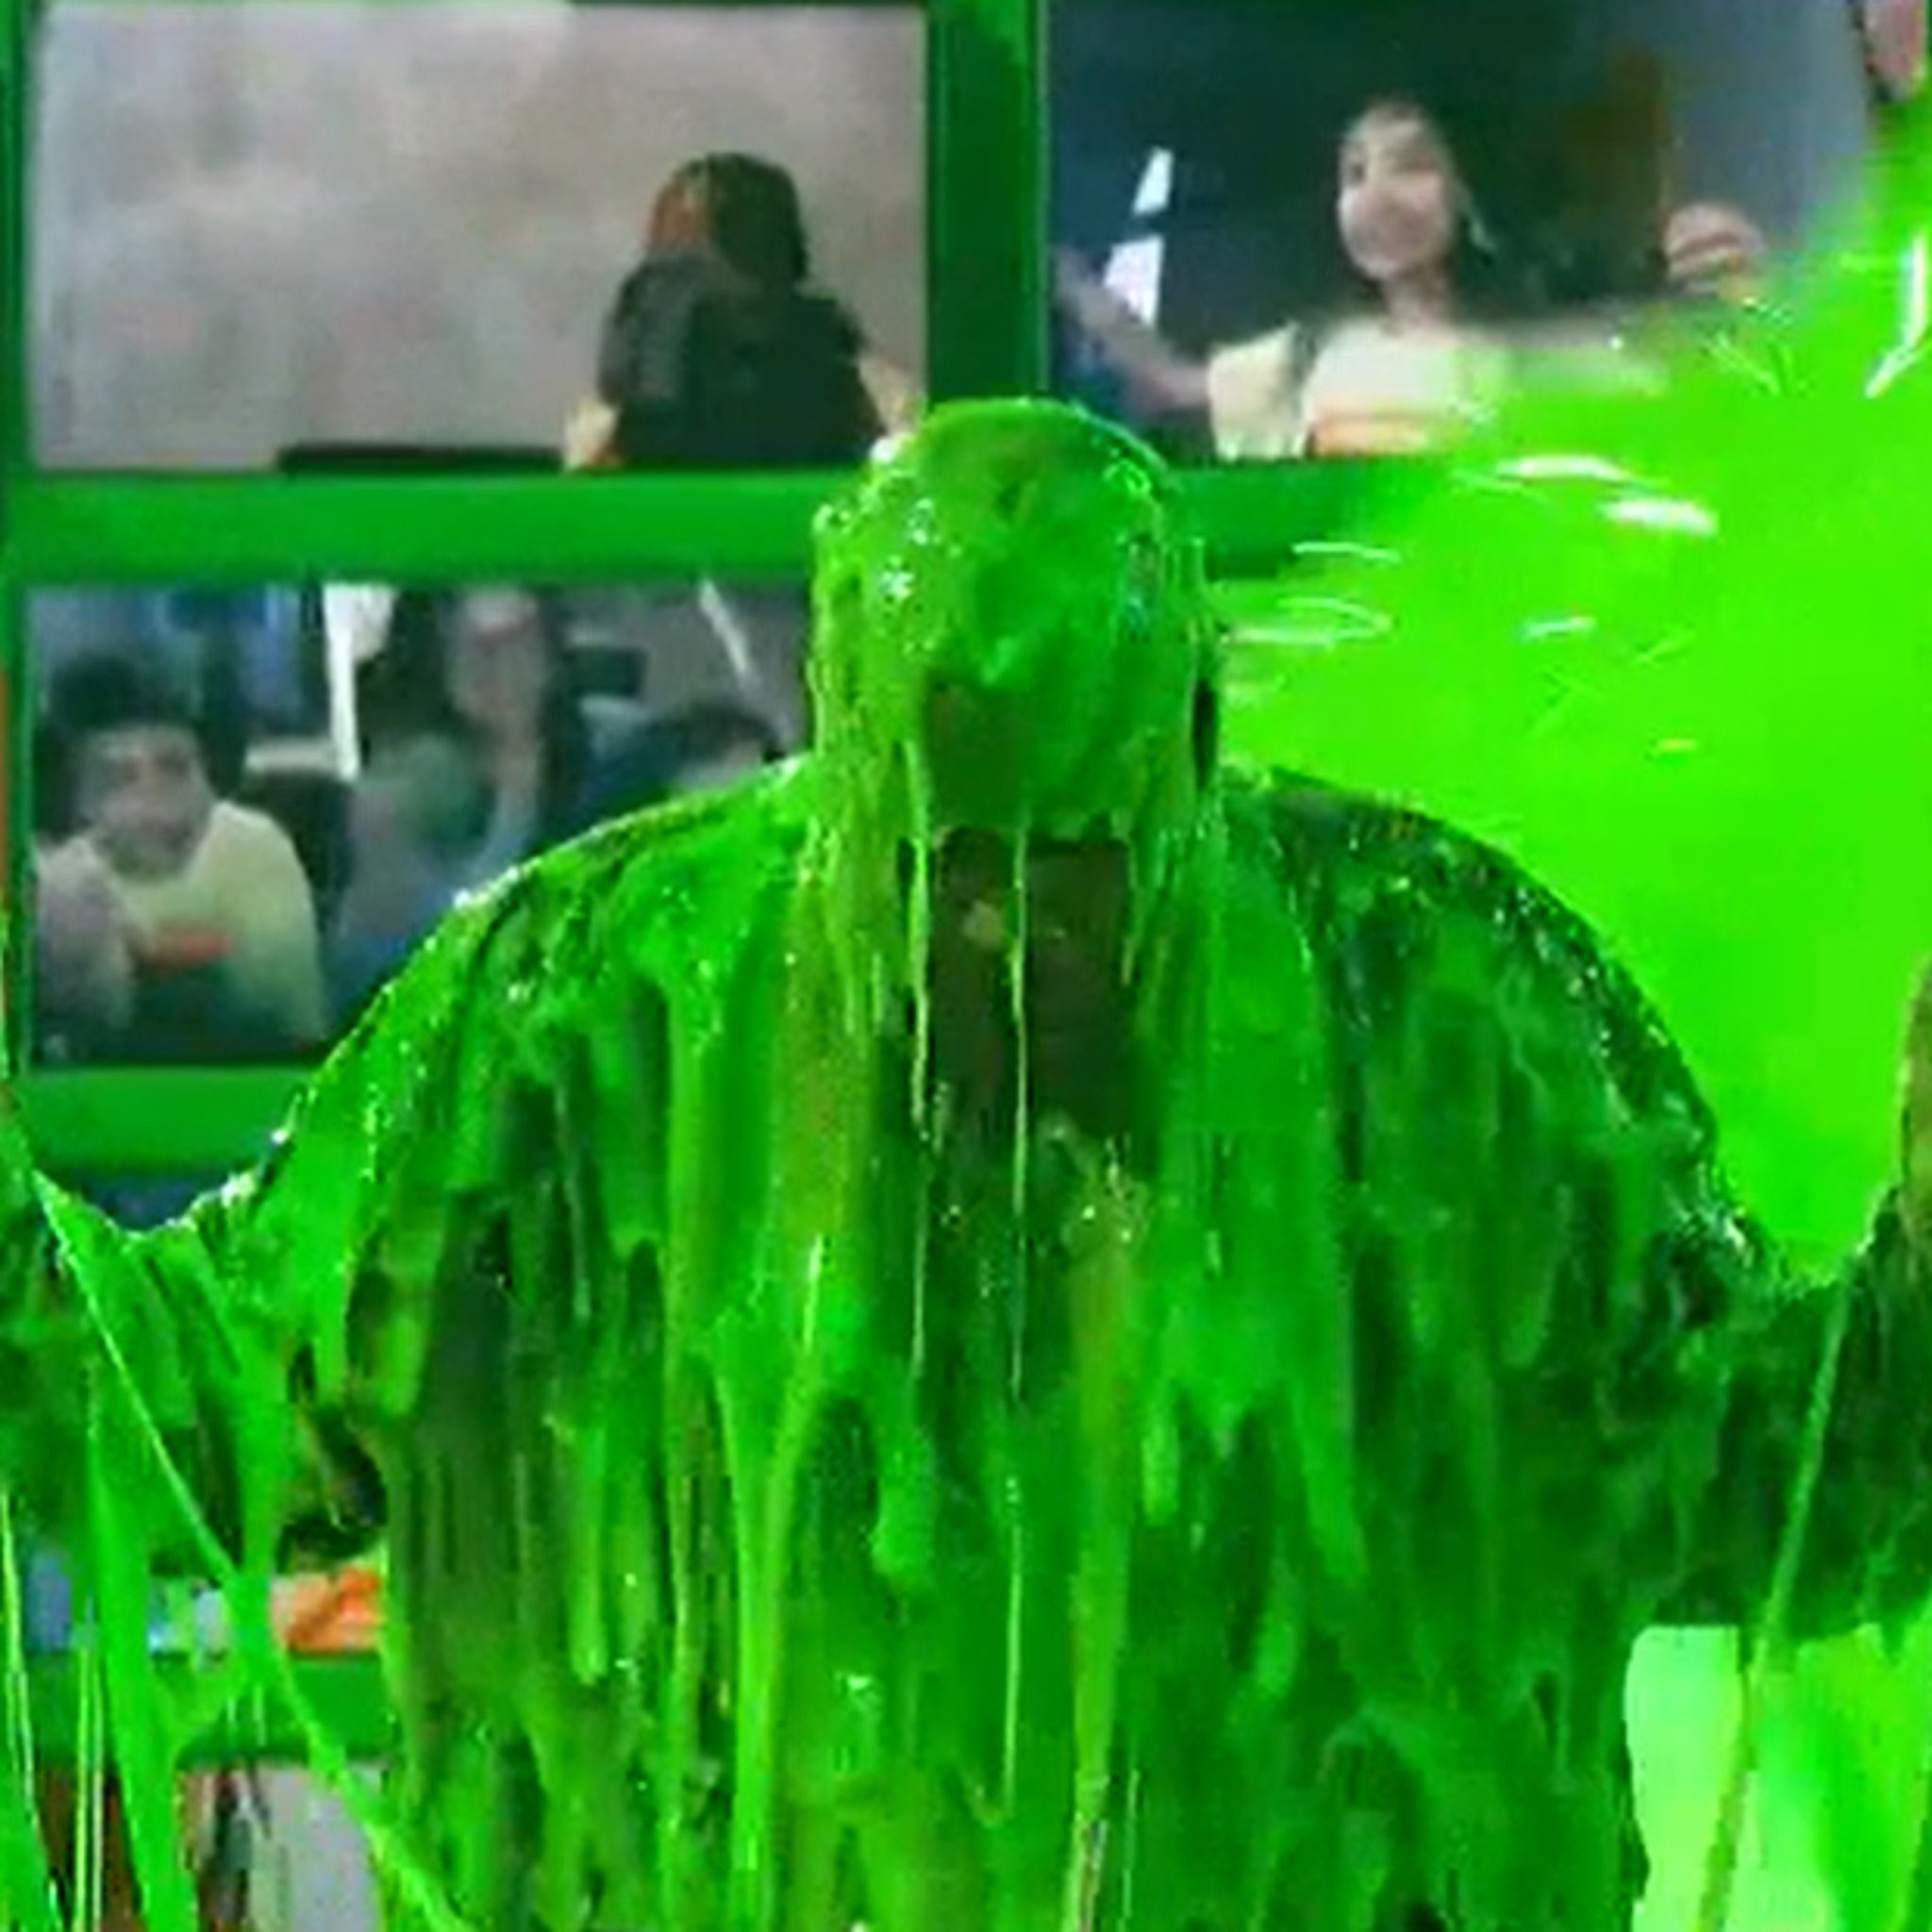 Nickelodeon Kids Choice Awards All The Viral Moments Big Winners And Slime - roblox slimed body suit